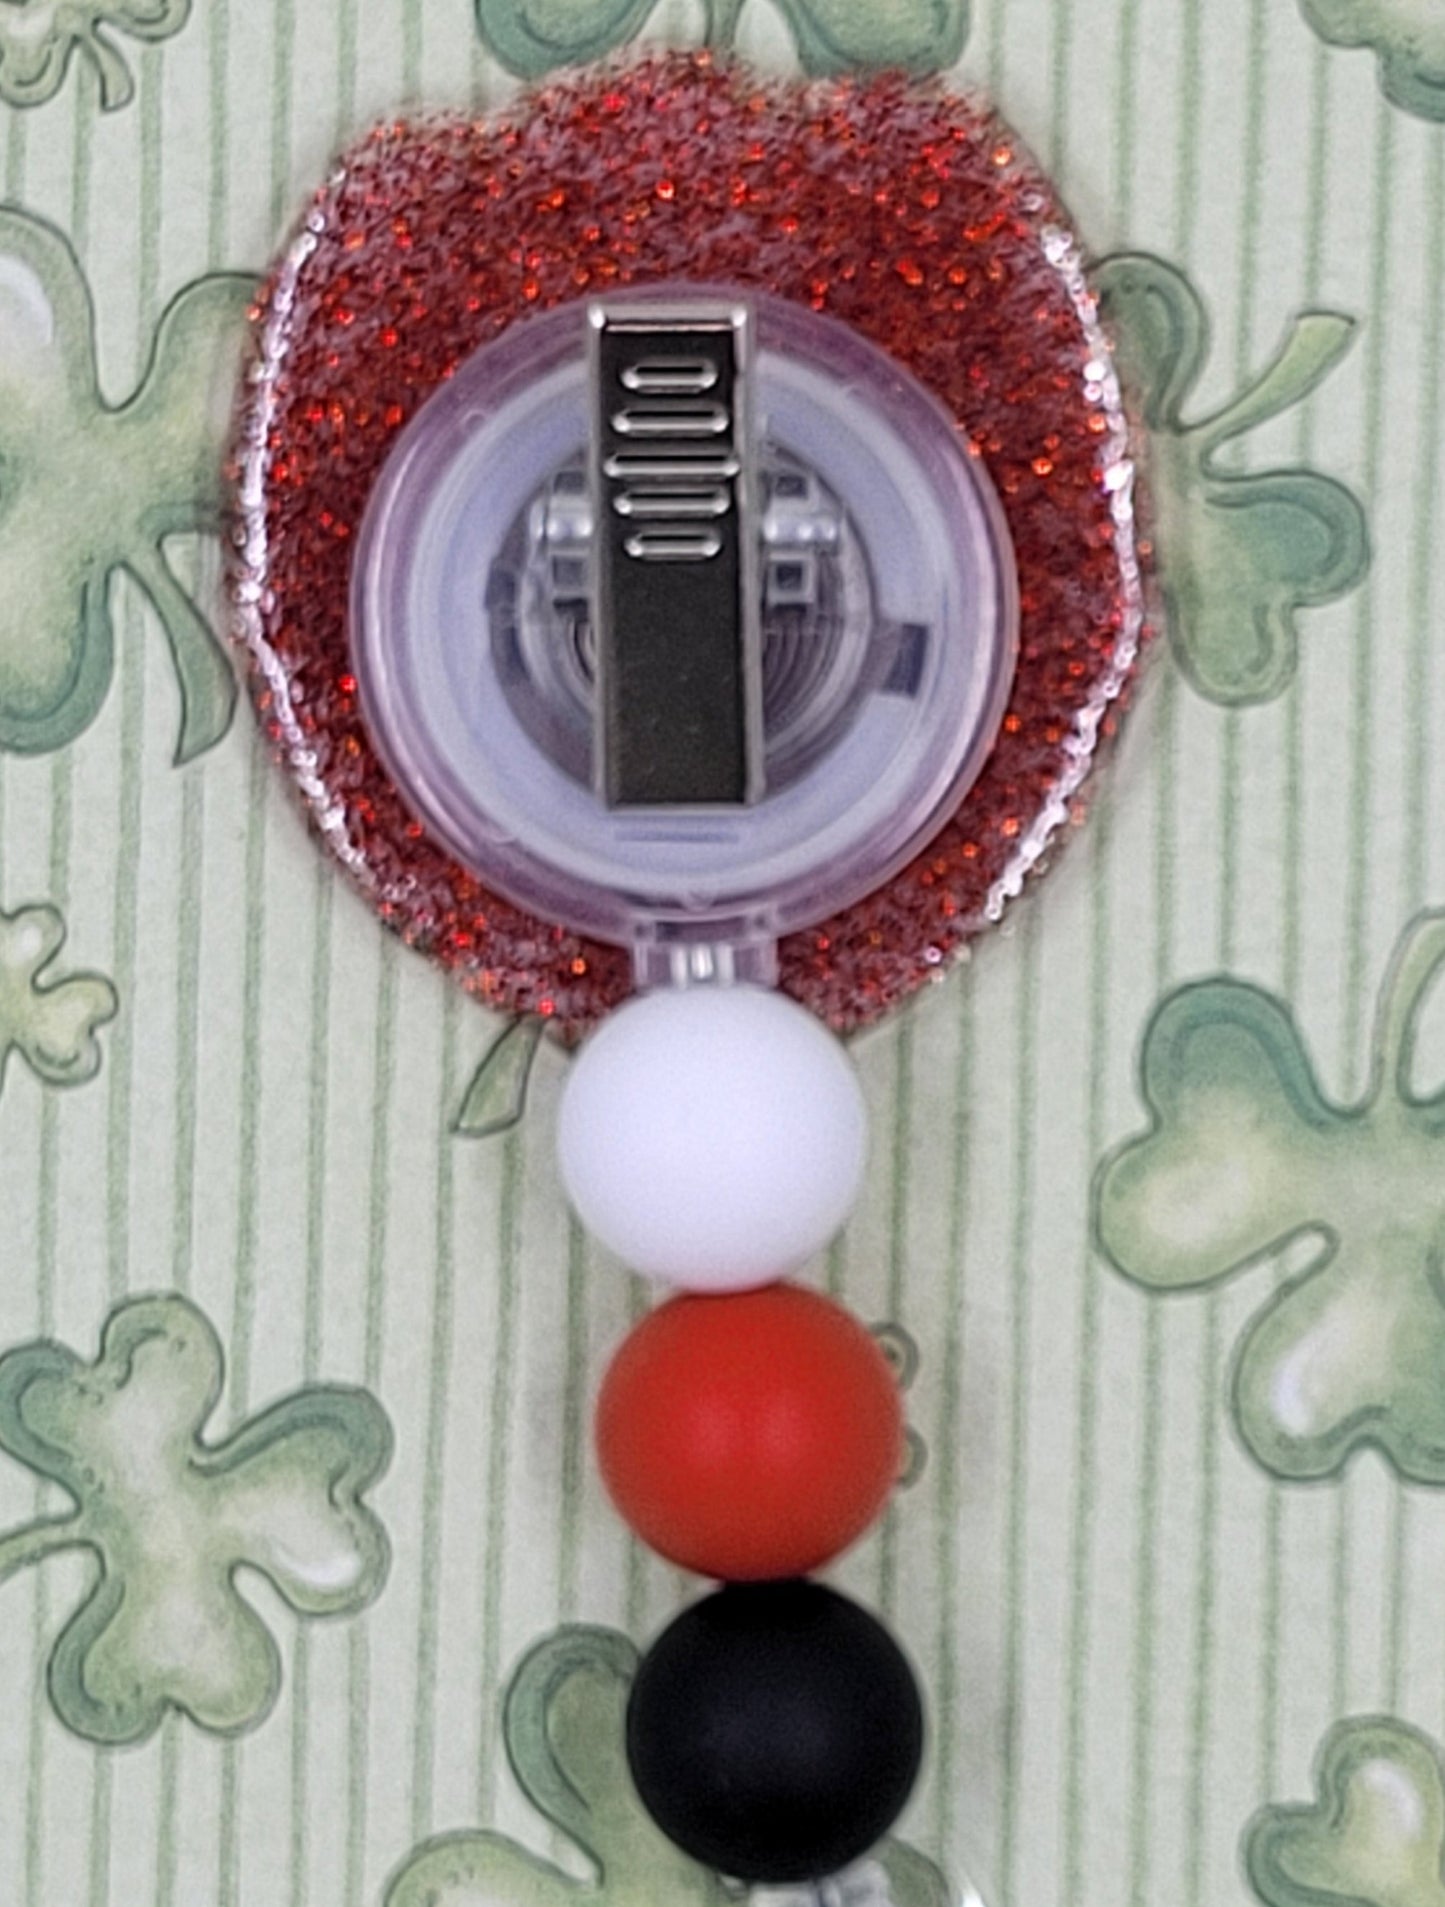 Felling Lucky? How about Luck X 3 lucky! This badge reel features 3 of the more popular lucky things. A horseshoe, a lady bug and of course a 4 Leaf Clover. A brilliant red glitter base and 3 silicone color coordinated beads finish the look.